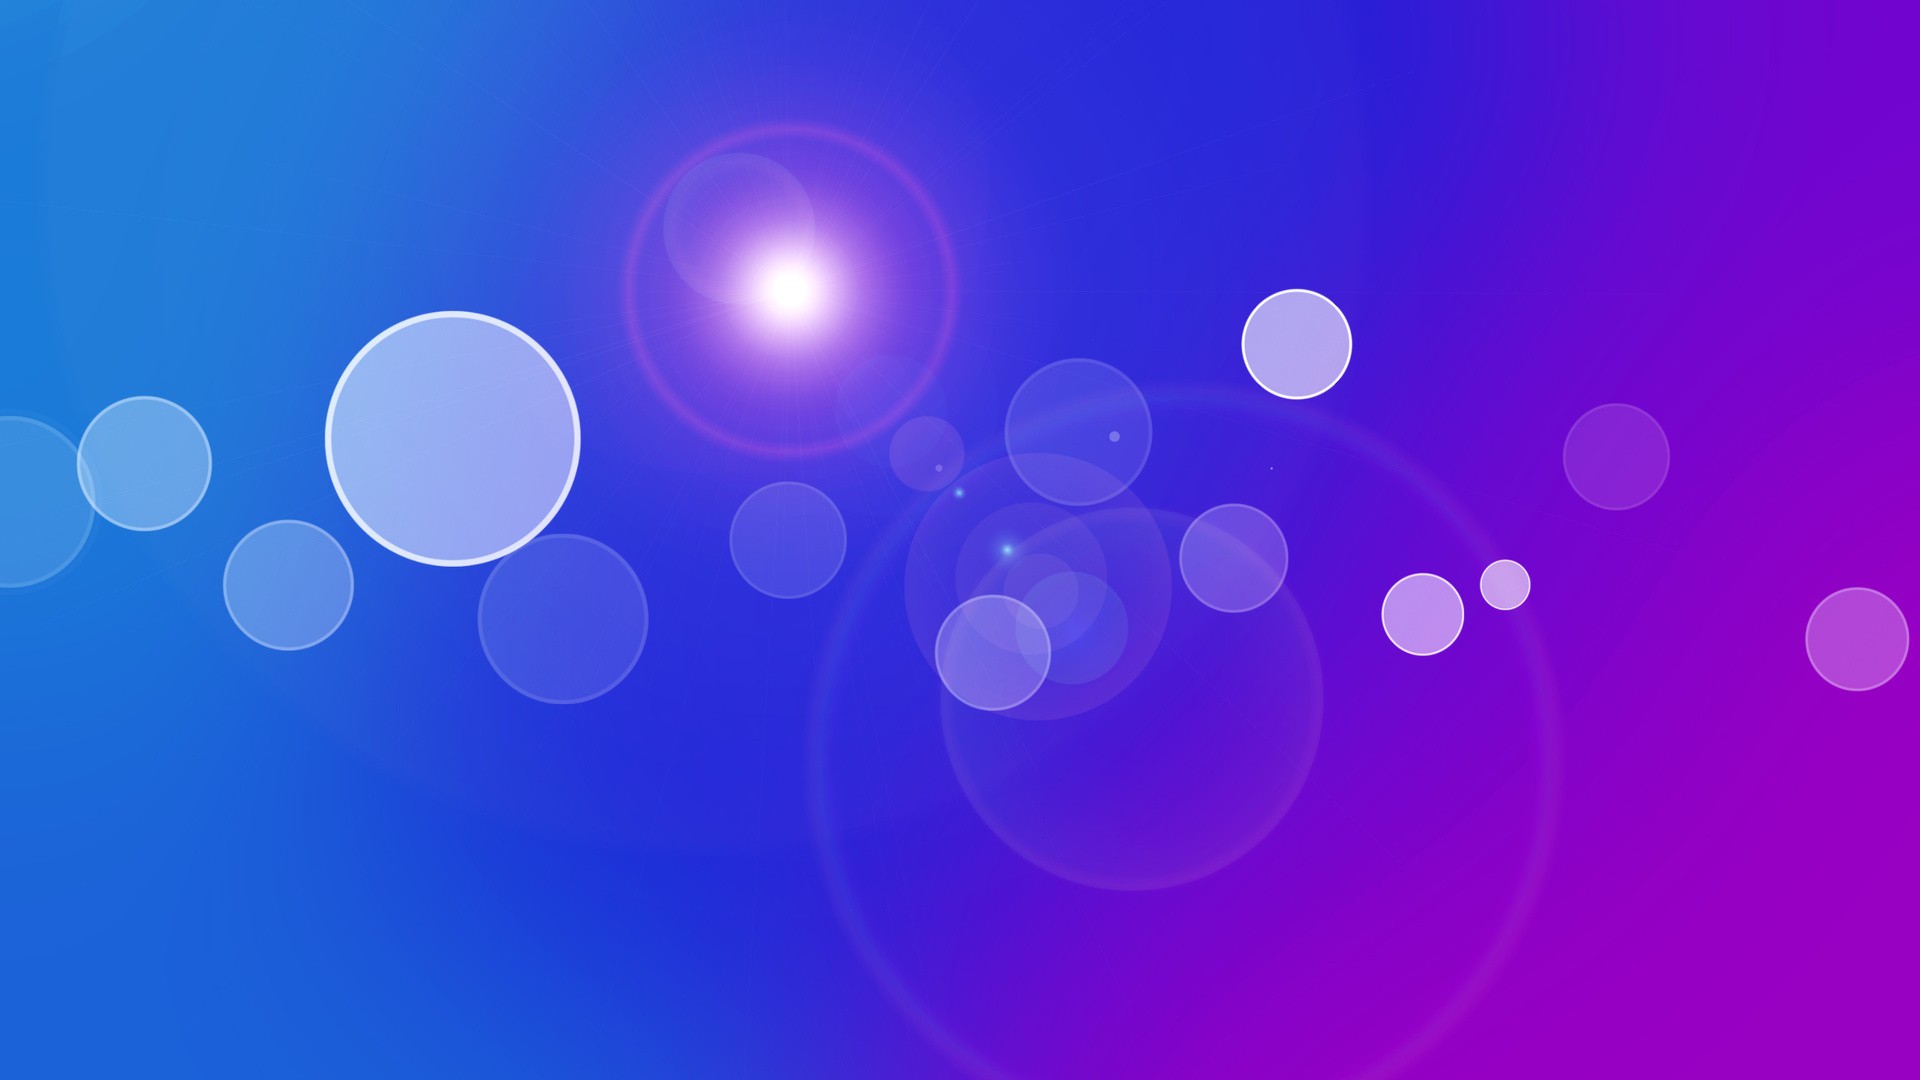  abstract blue purple circles gradient colors wallpaper background